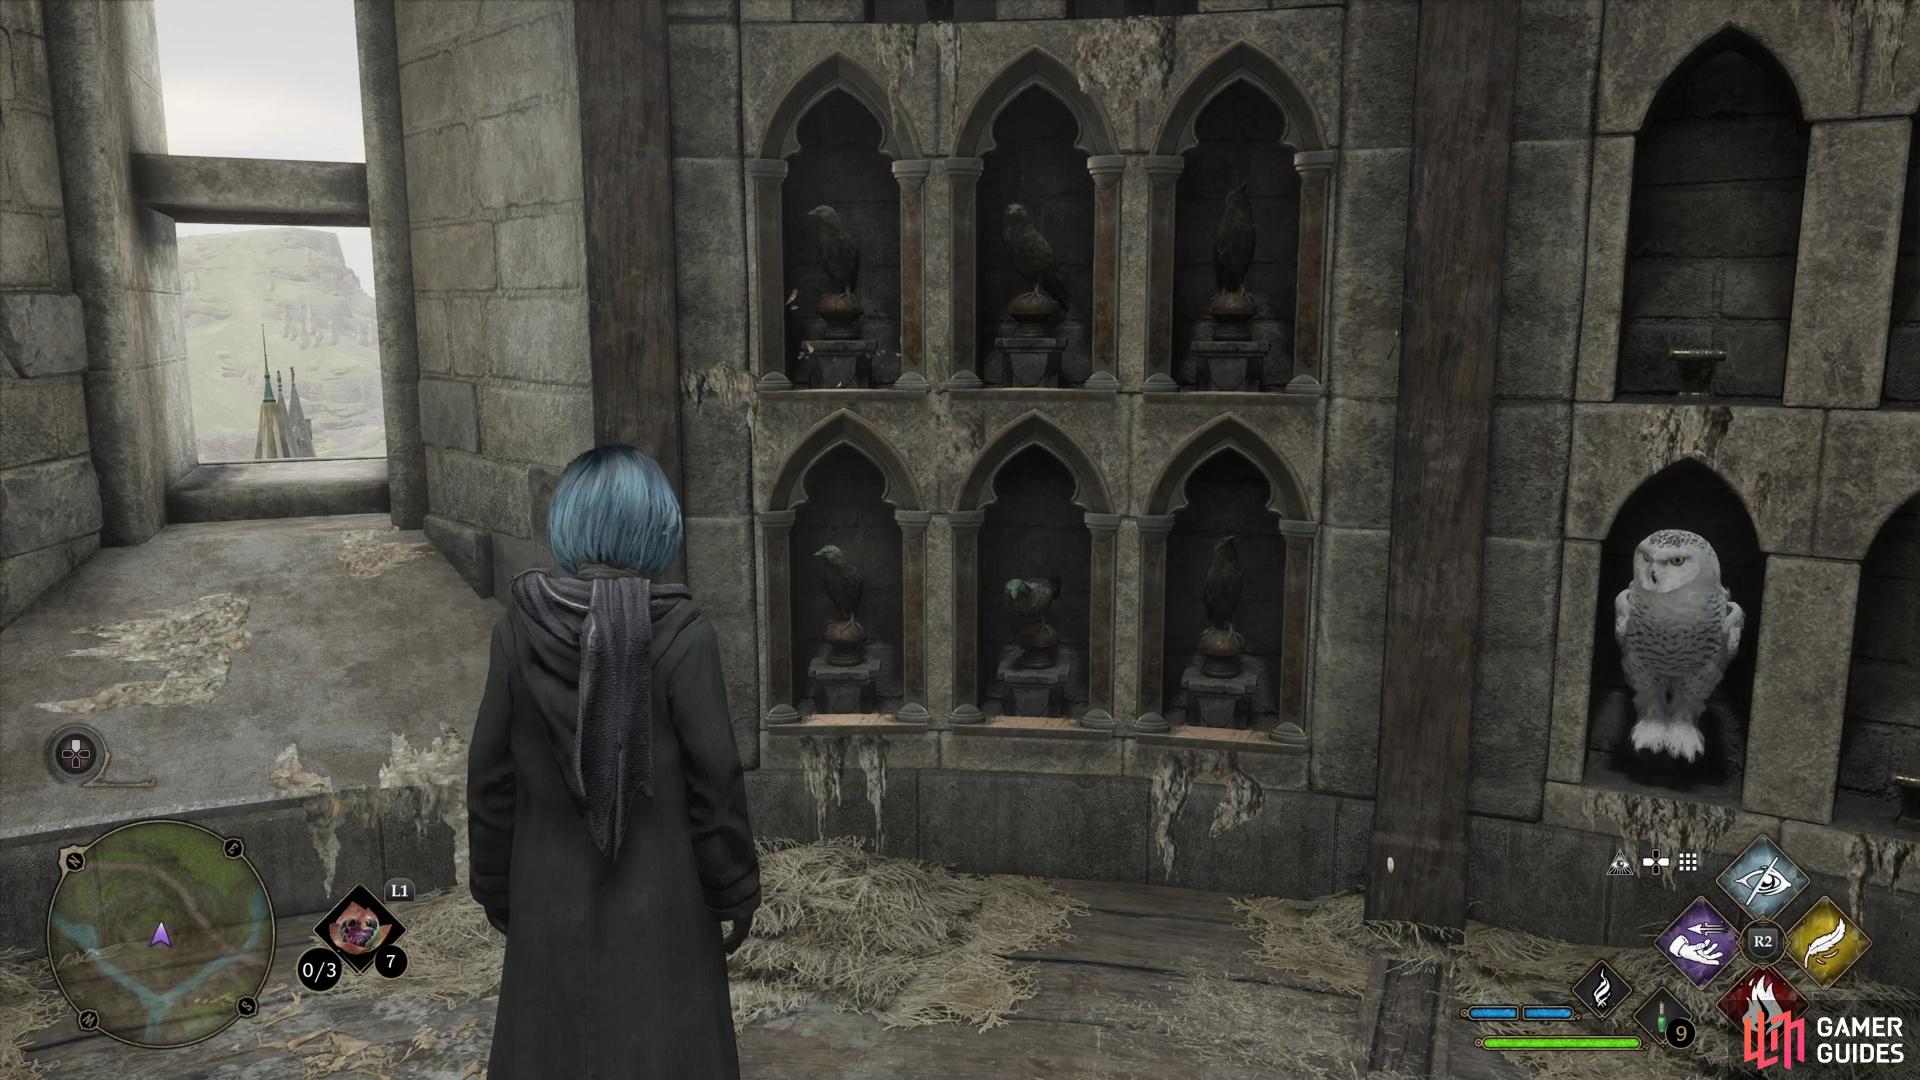 then place the five Jackdaw Statues you find on their perches.